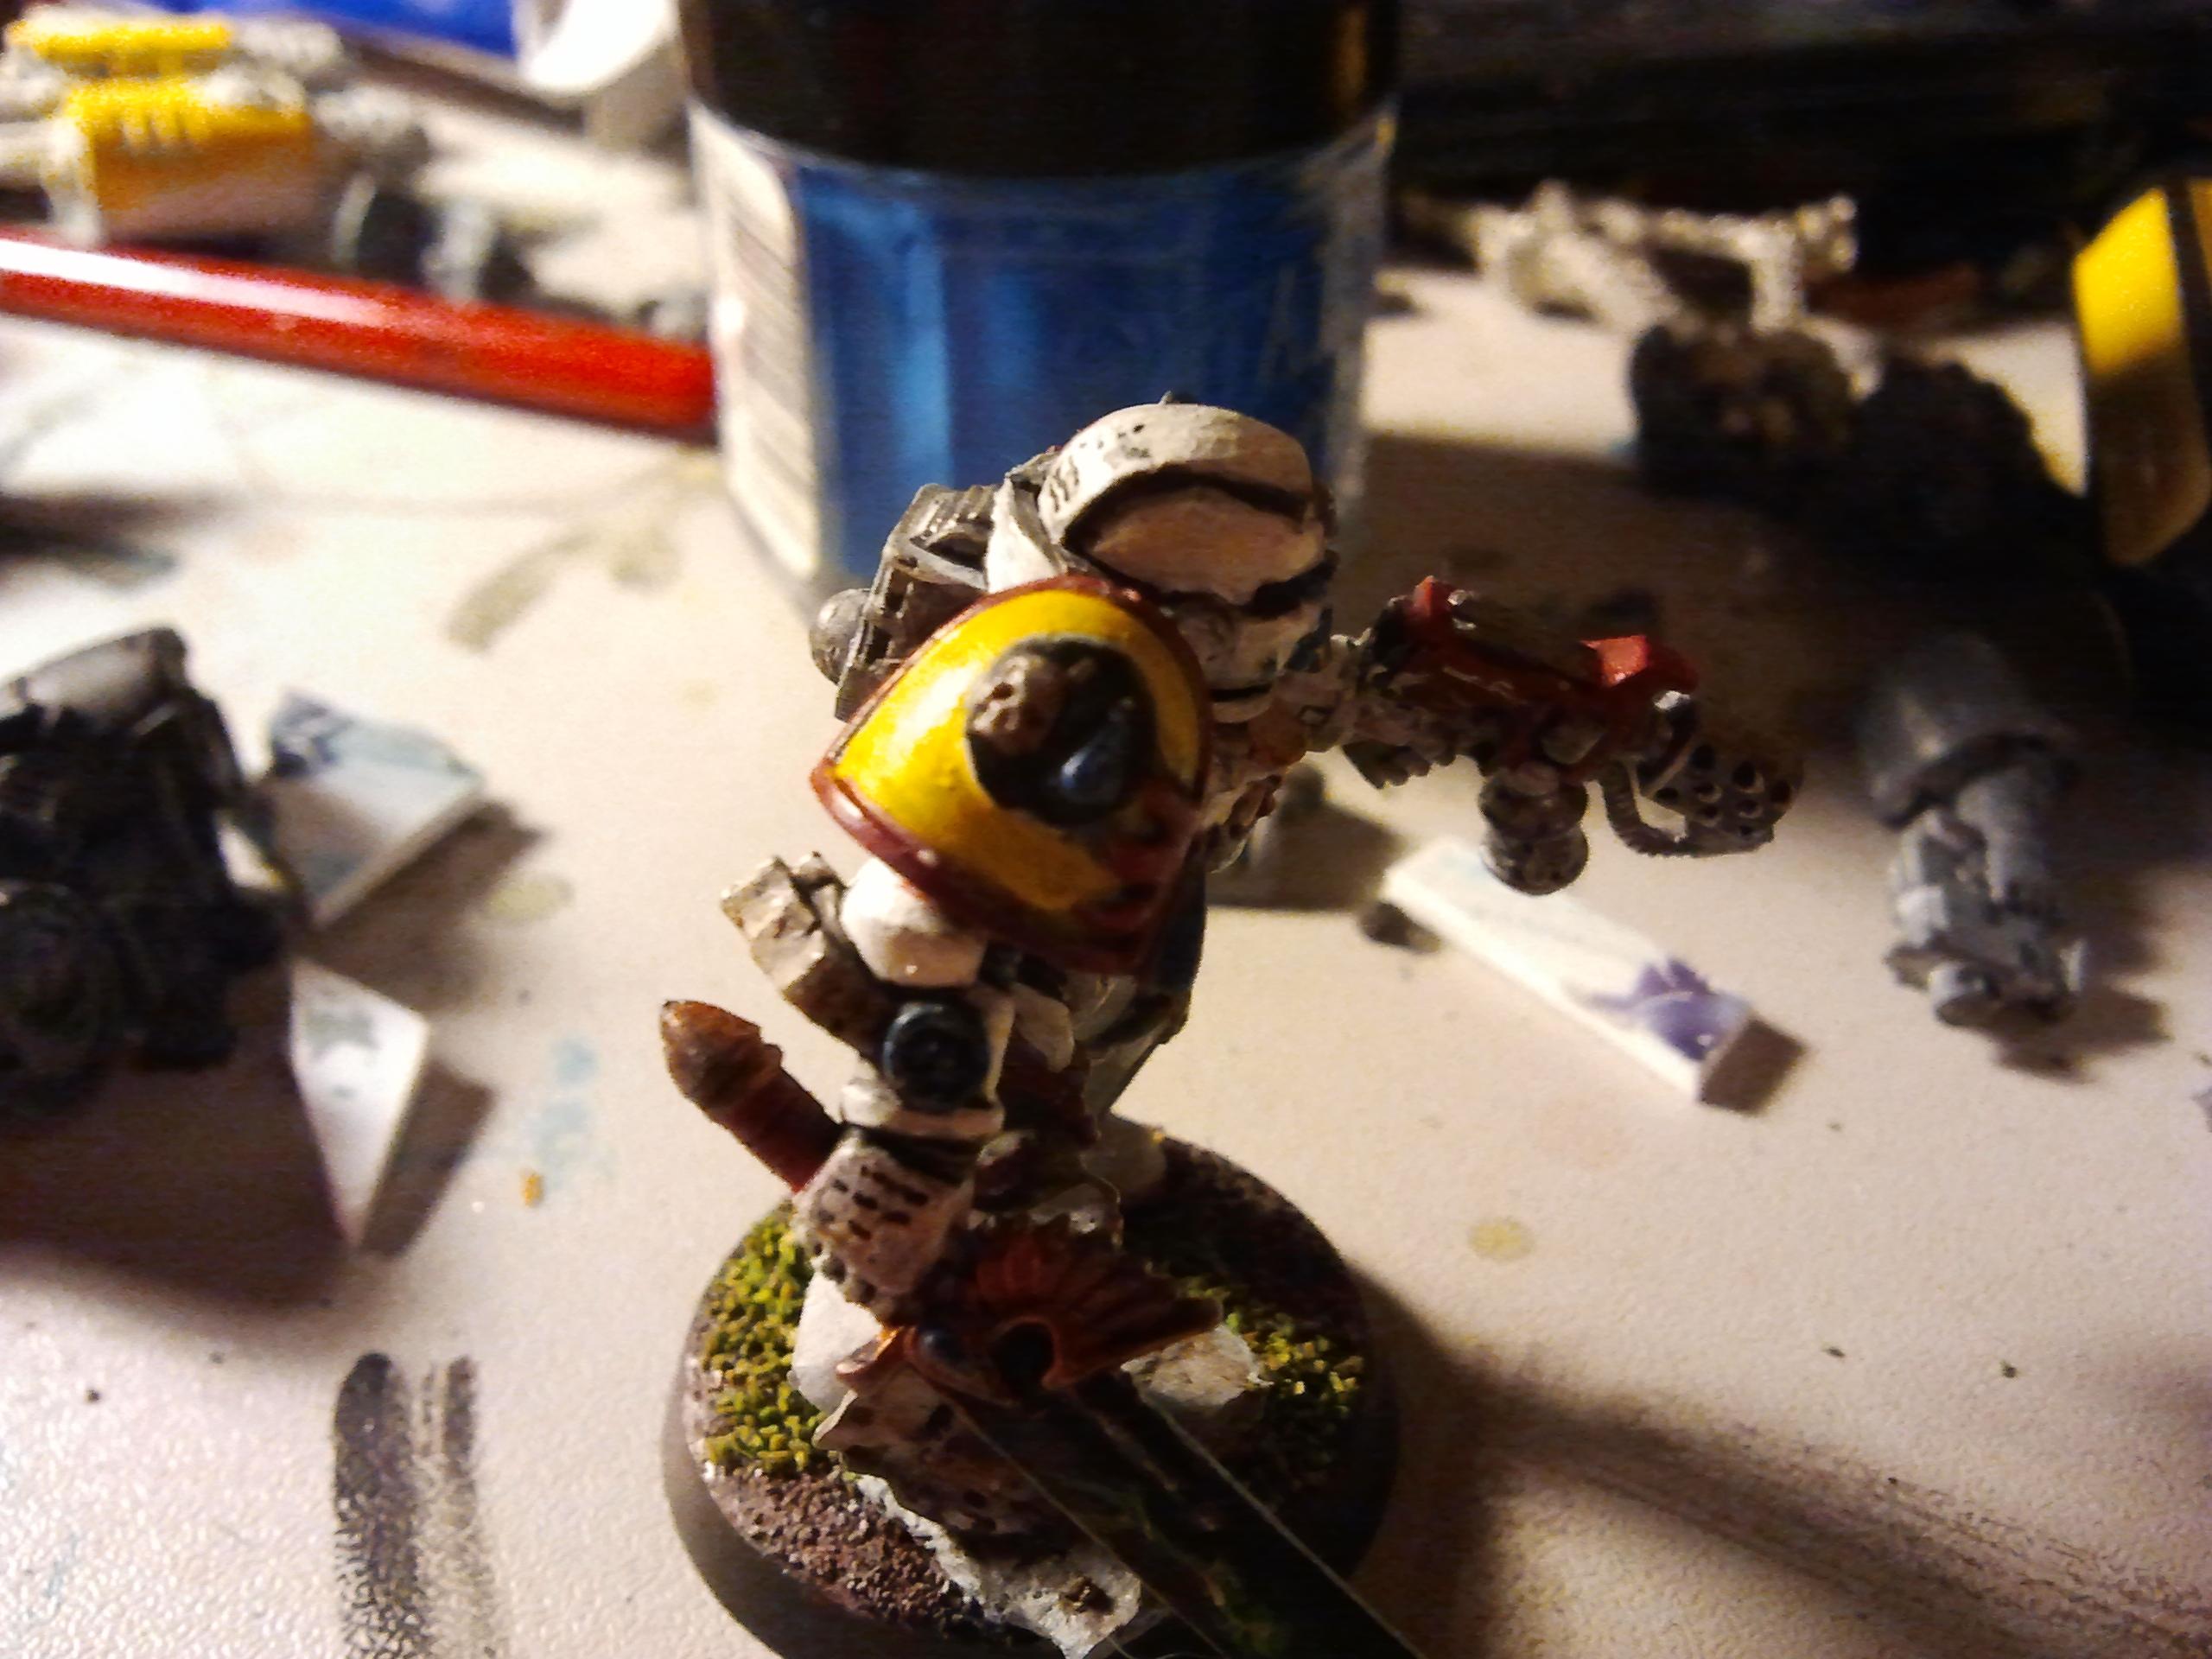 painted the shoulderpad yellow to tie it in